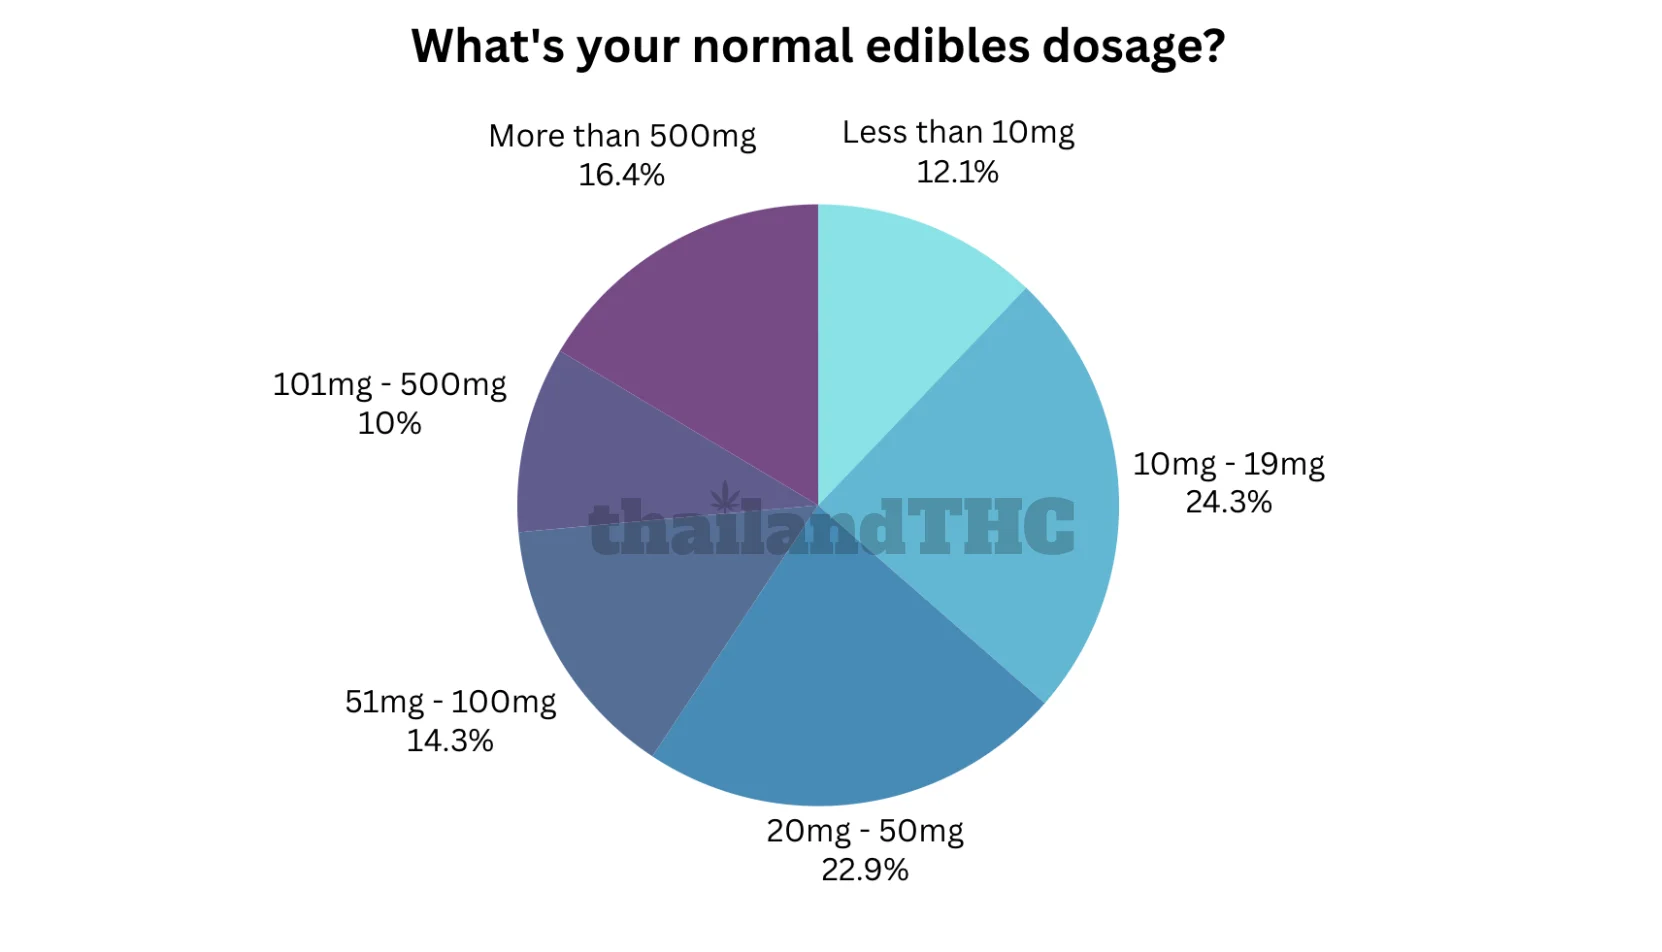 What's your normal edibles dosage?